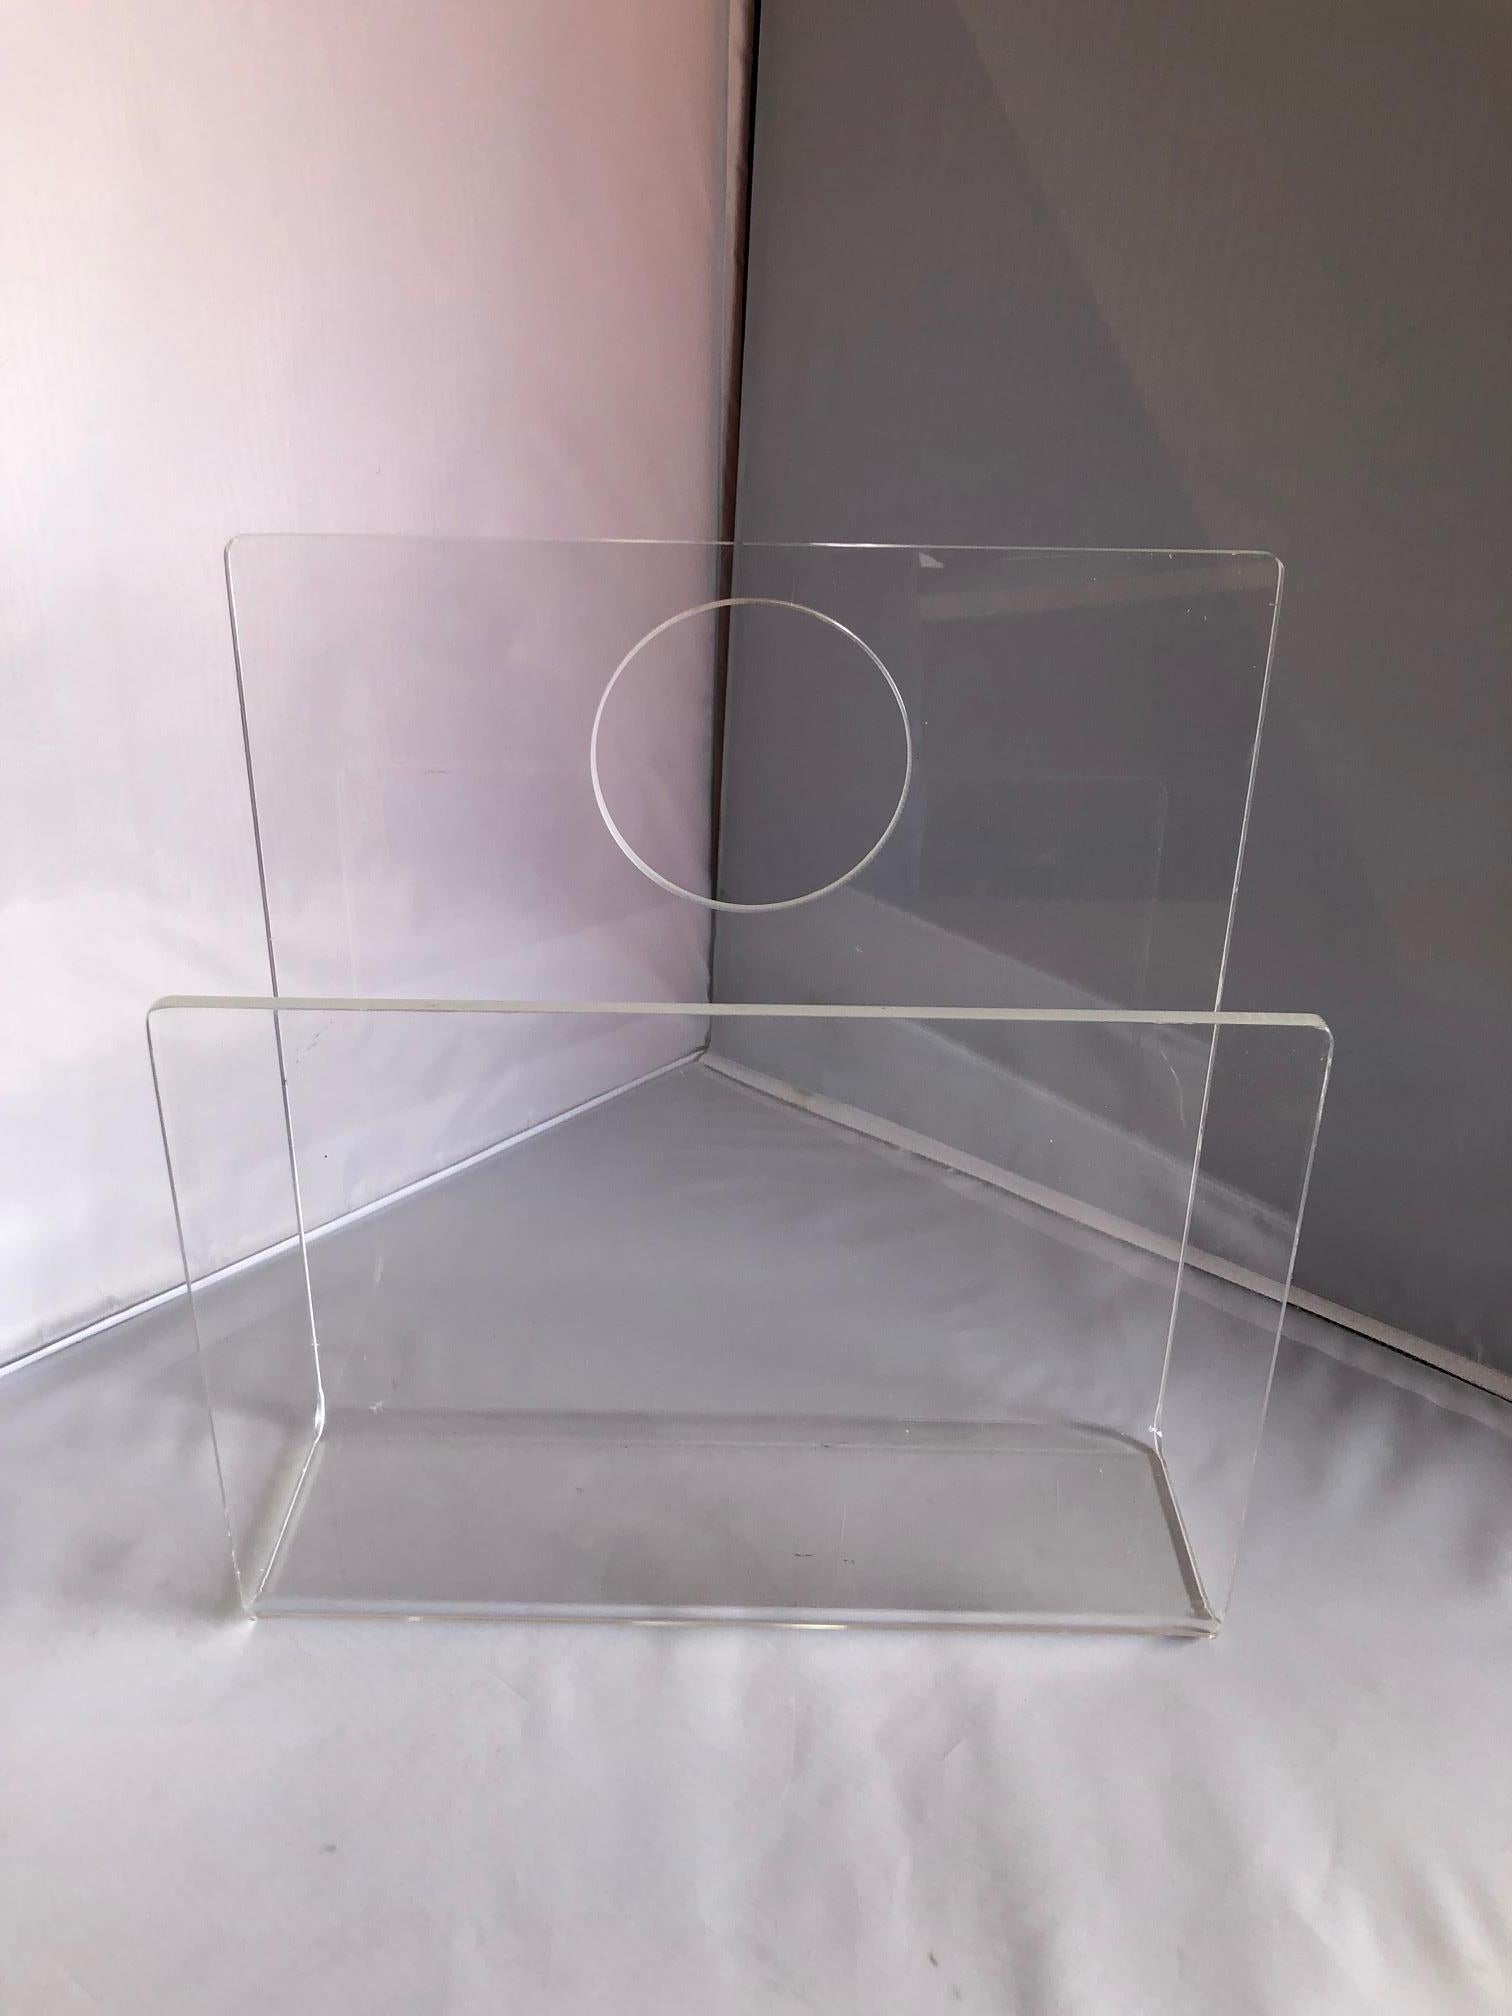 Mid-Century Modern acrylic magazine rack / holder by Ferguson of England, circa 1970s. The piece is in very good vintage condition with appropriate wear.